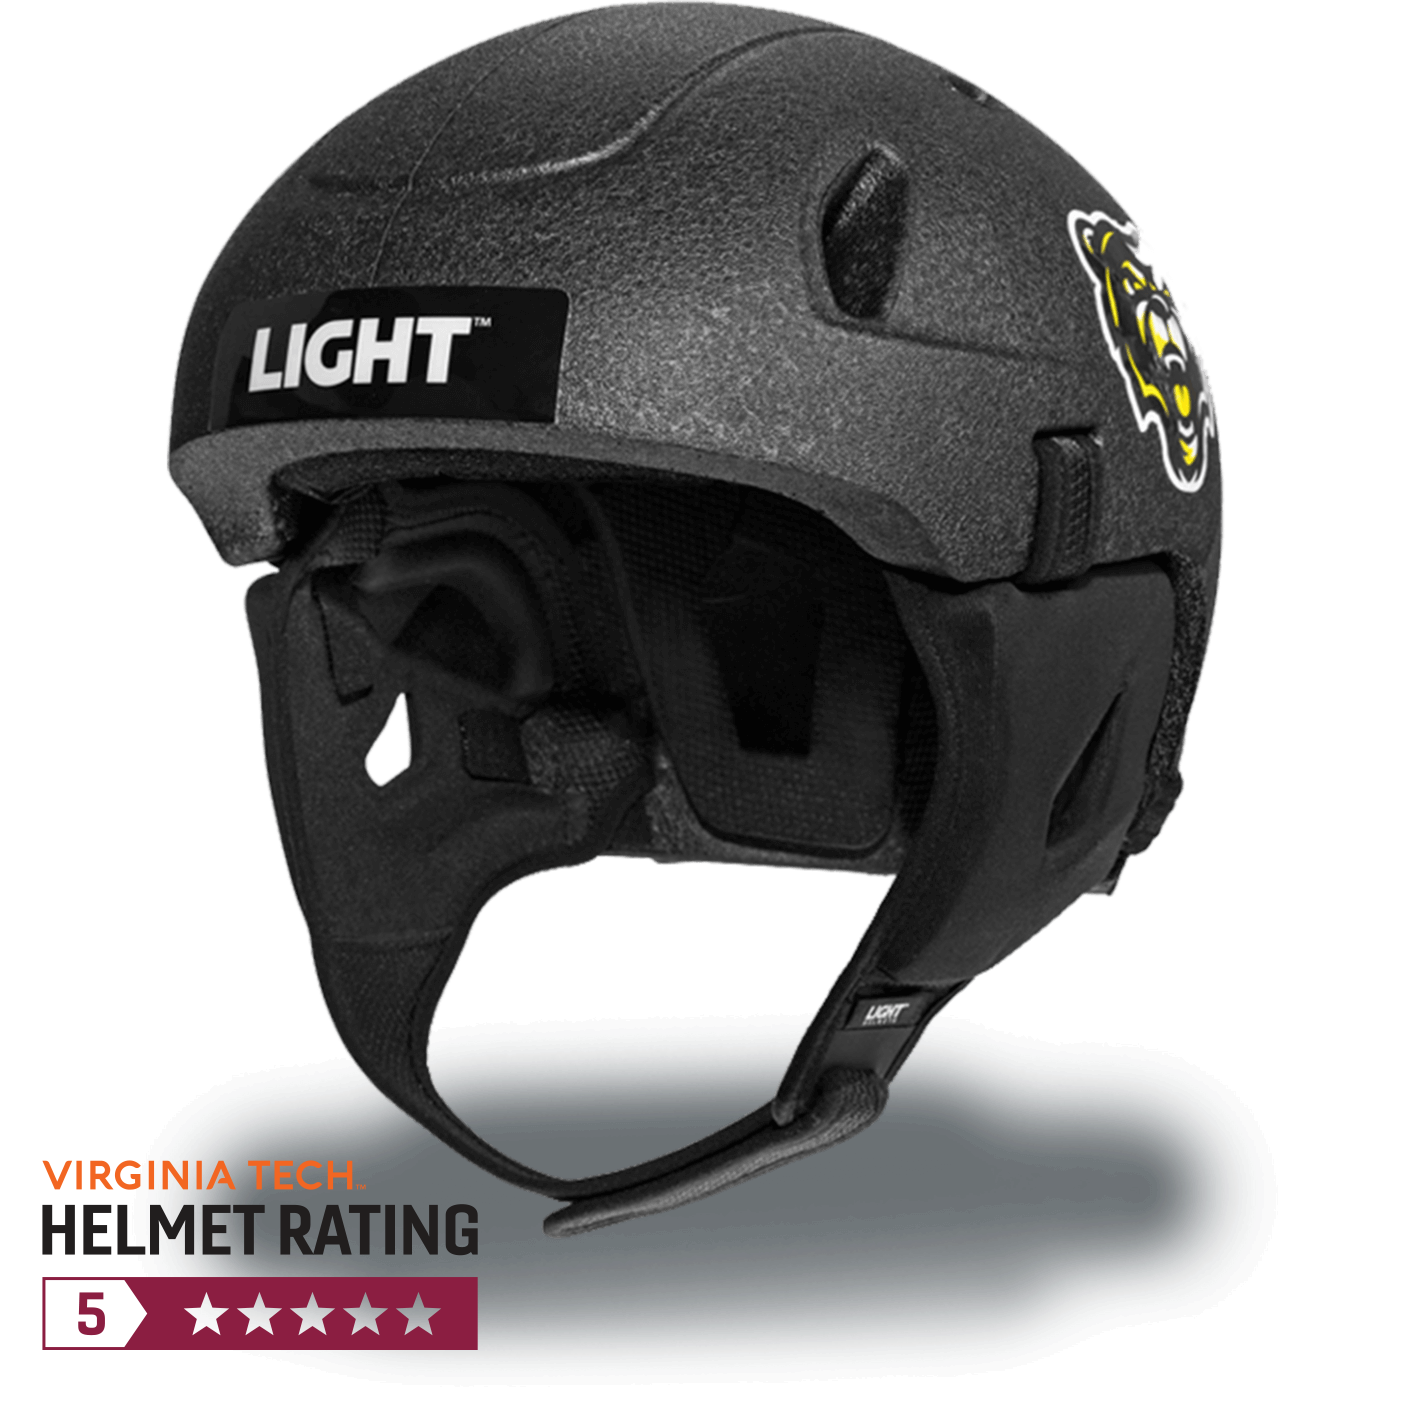 Black LIGHT SS1 Soft headgear helmet on white background with customized decals